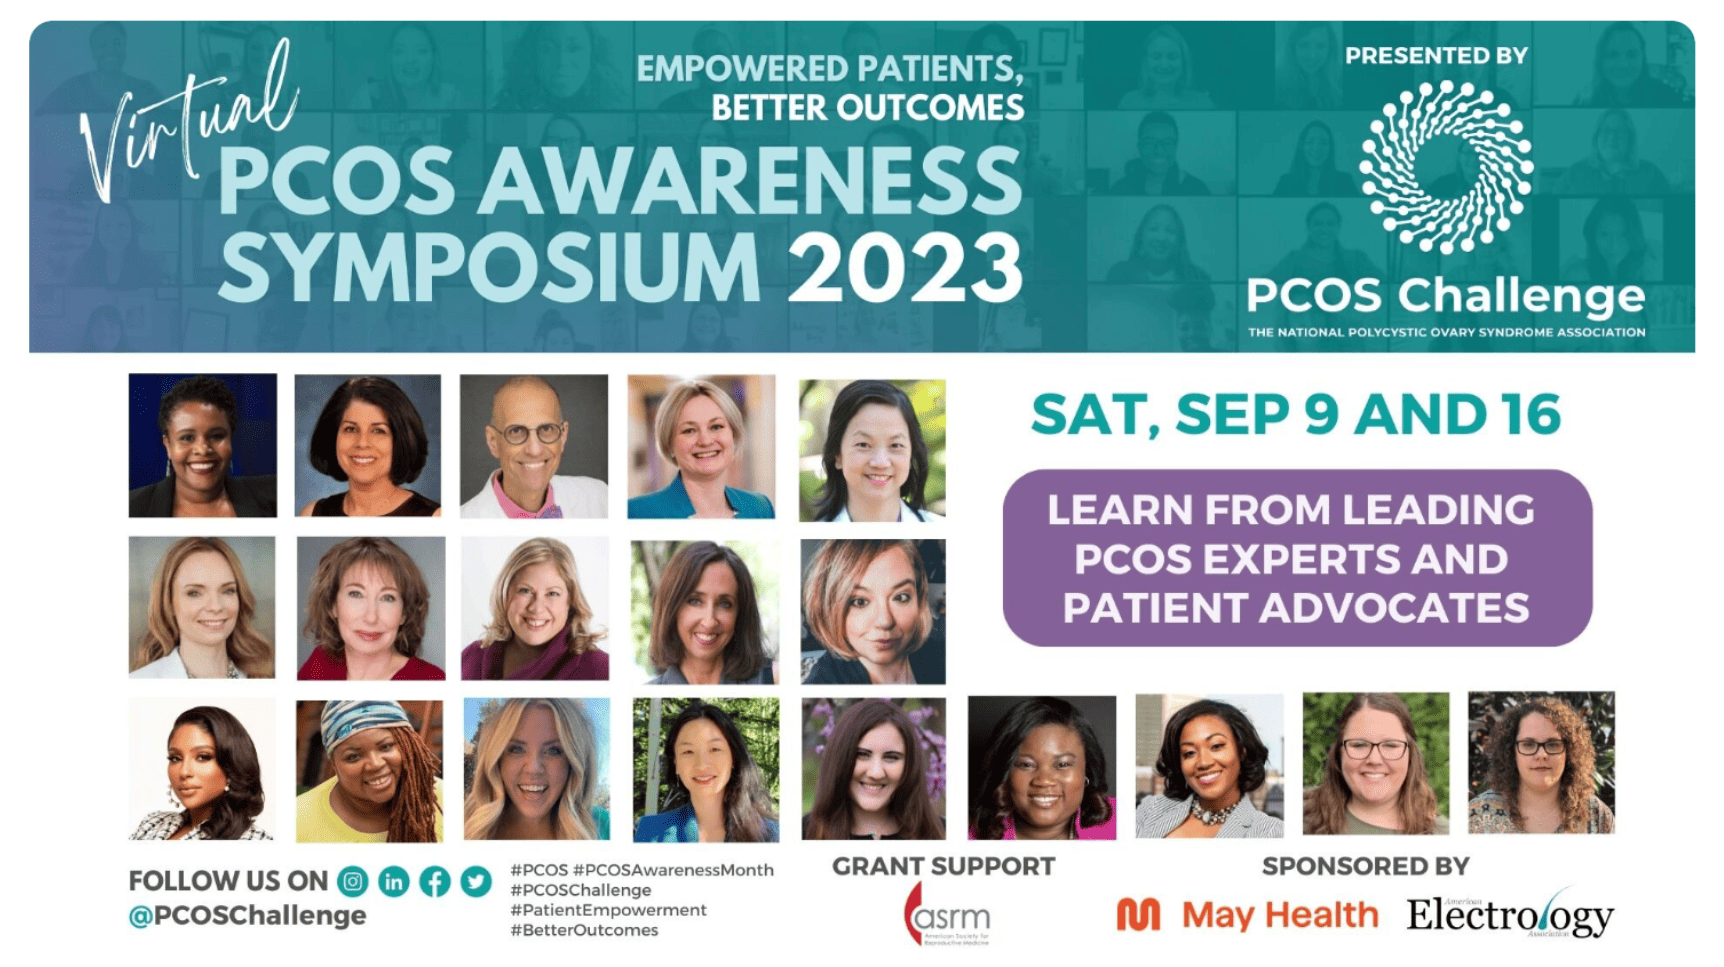 PCOS Awareness Symposium 2023: A Vital Resource for Understanding and Managing PCOS